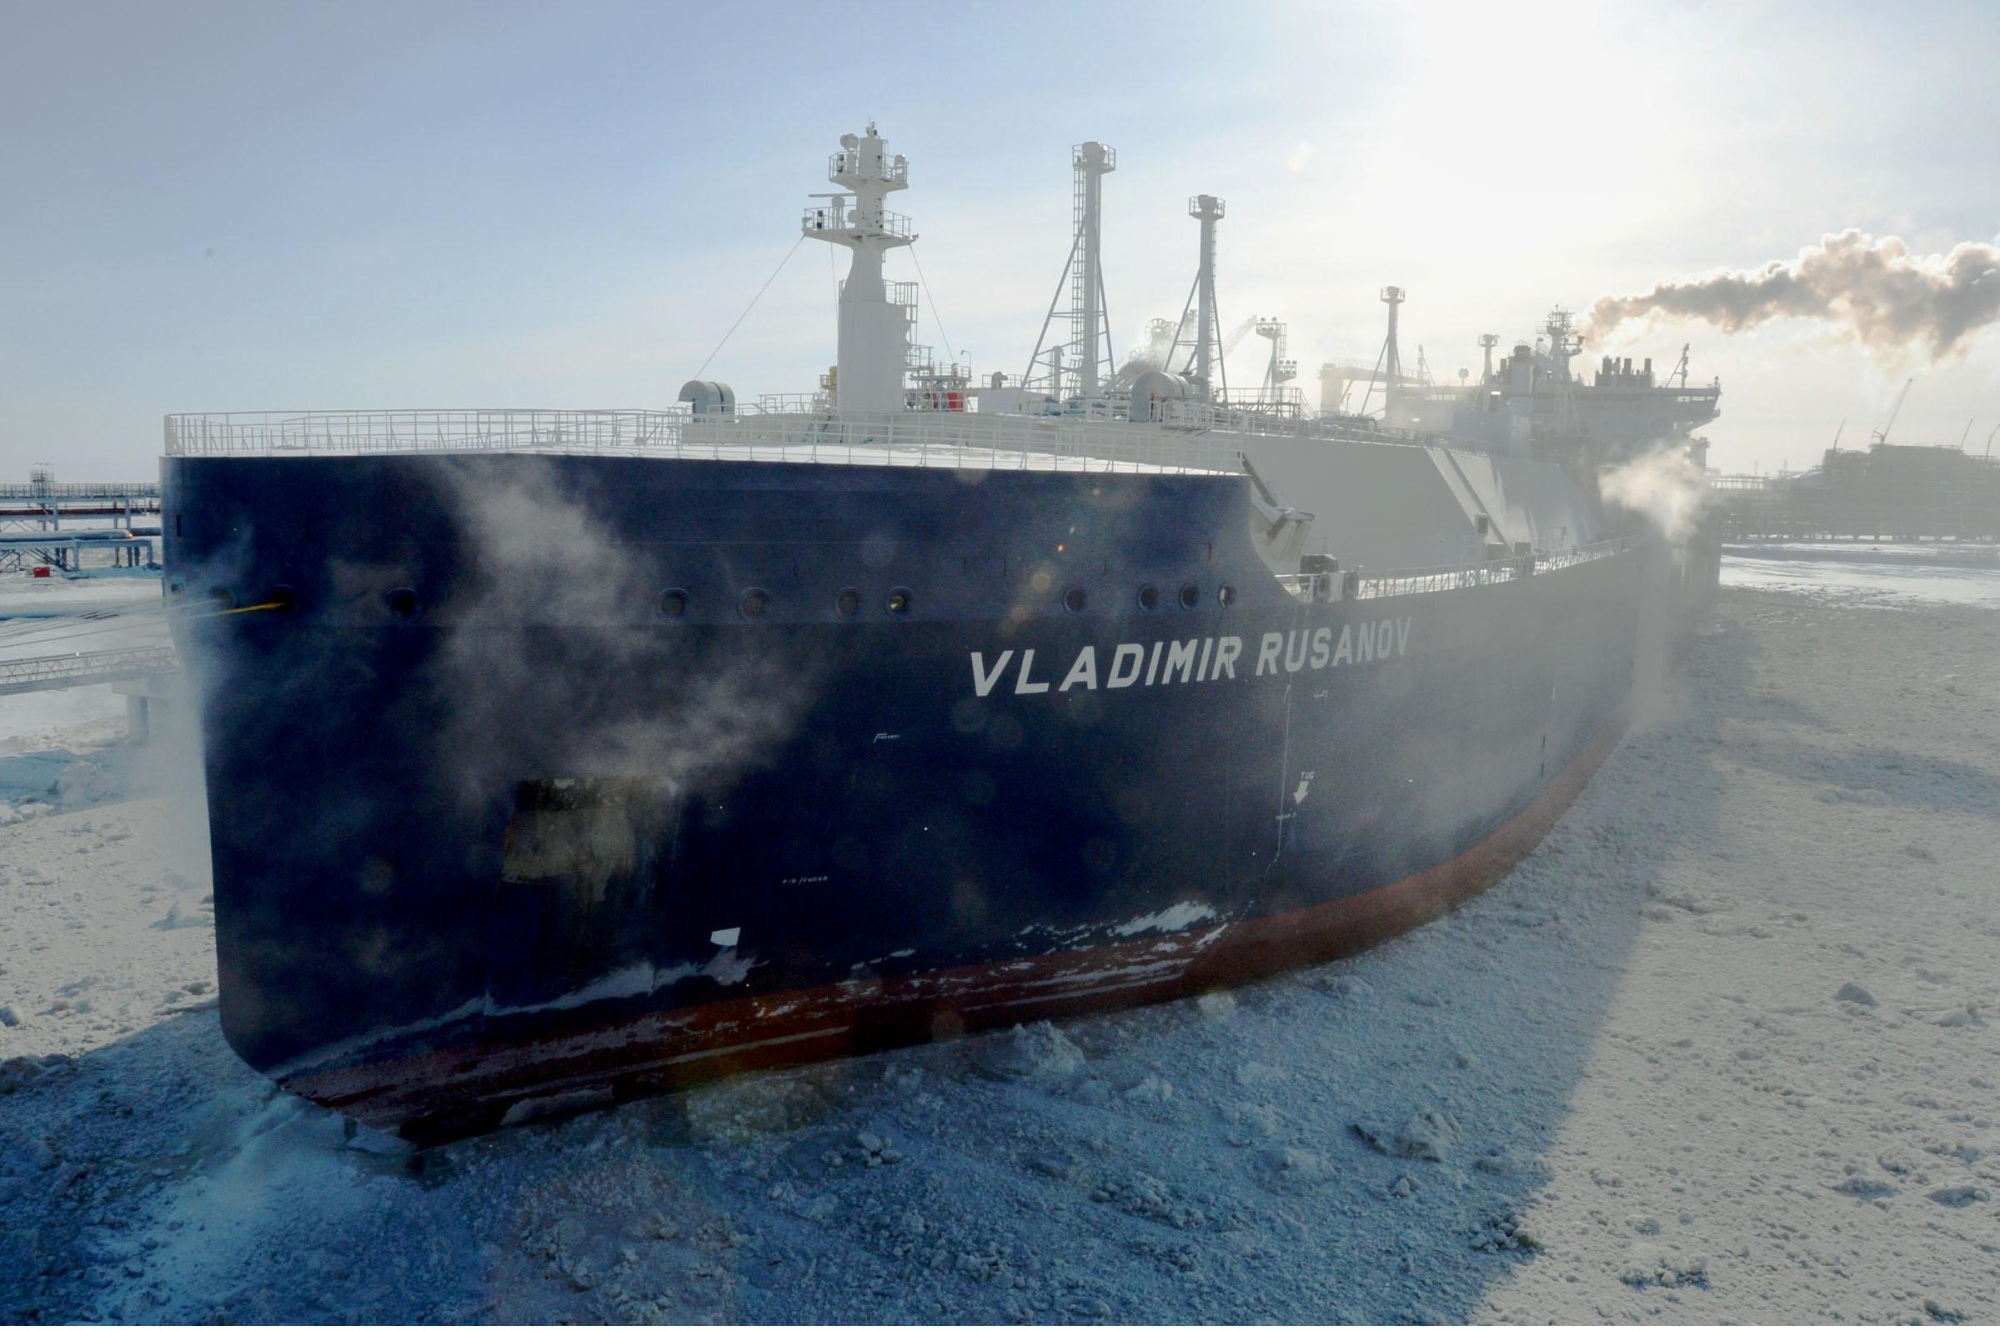 The Vladimir Rusanov, an ice-breaking tanker run by Mitsui O.S.K. Lines Ltd., is loaded with liquefied natural gas at a port in Sabbeta, Russia, on Wednesday. | KYODO